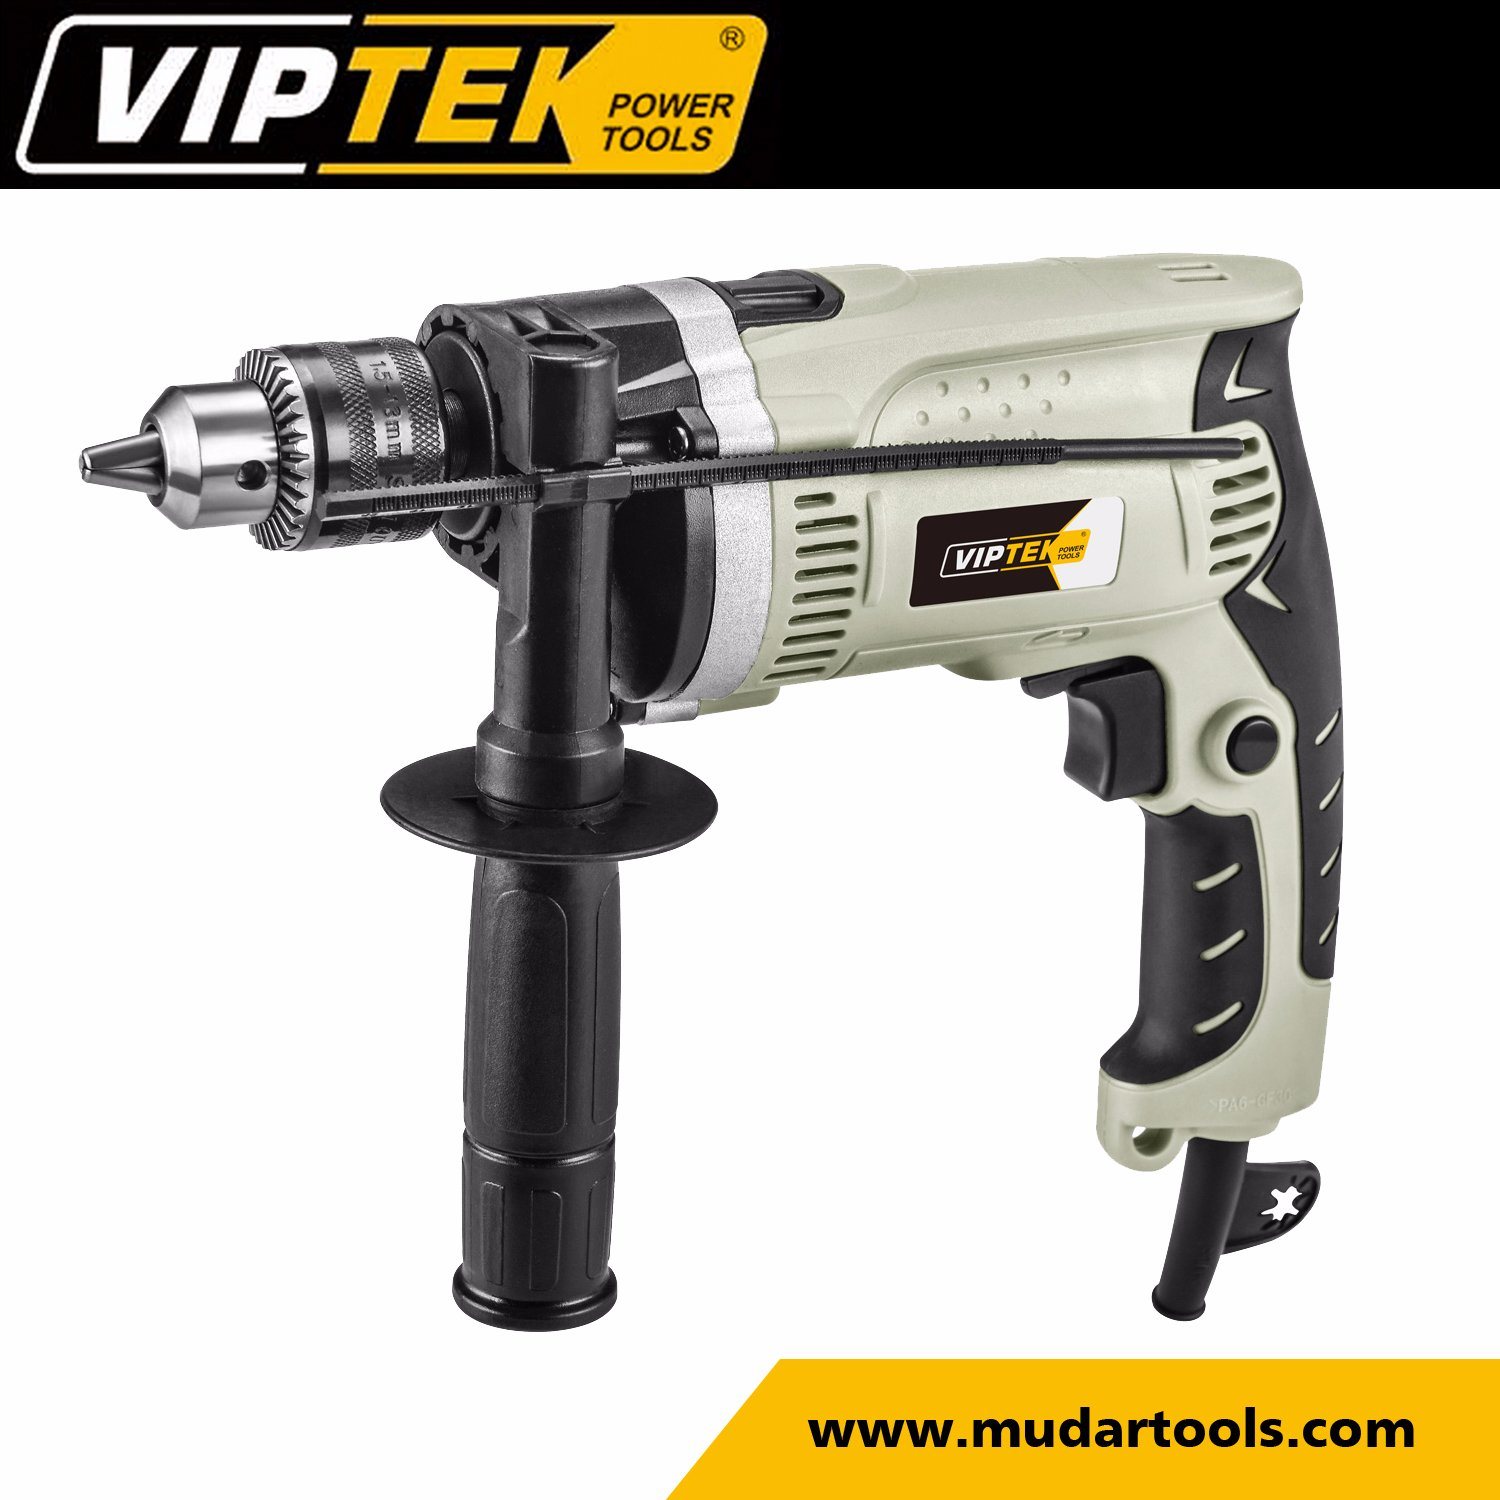 13mm 600W Variable Speed Electric Impact Drill